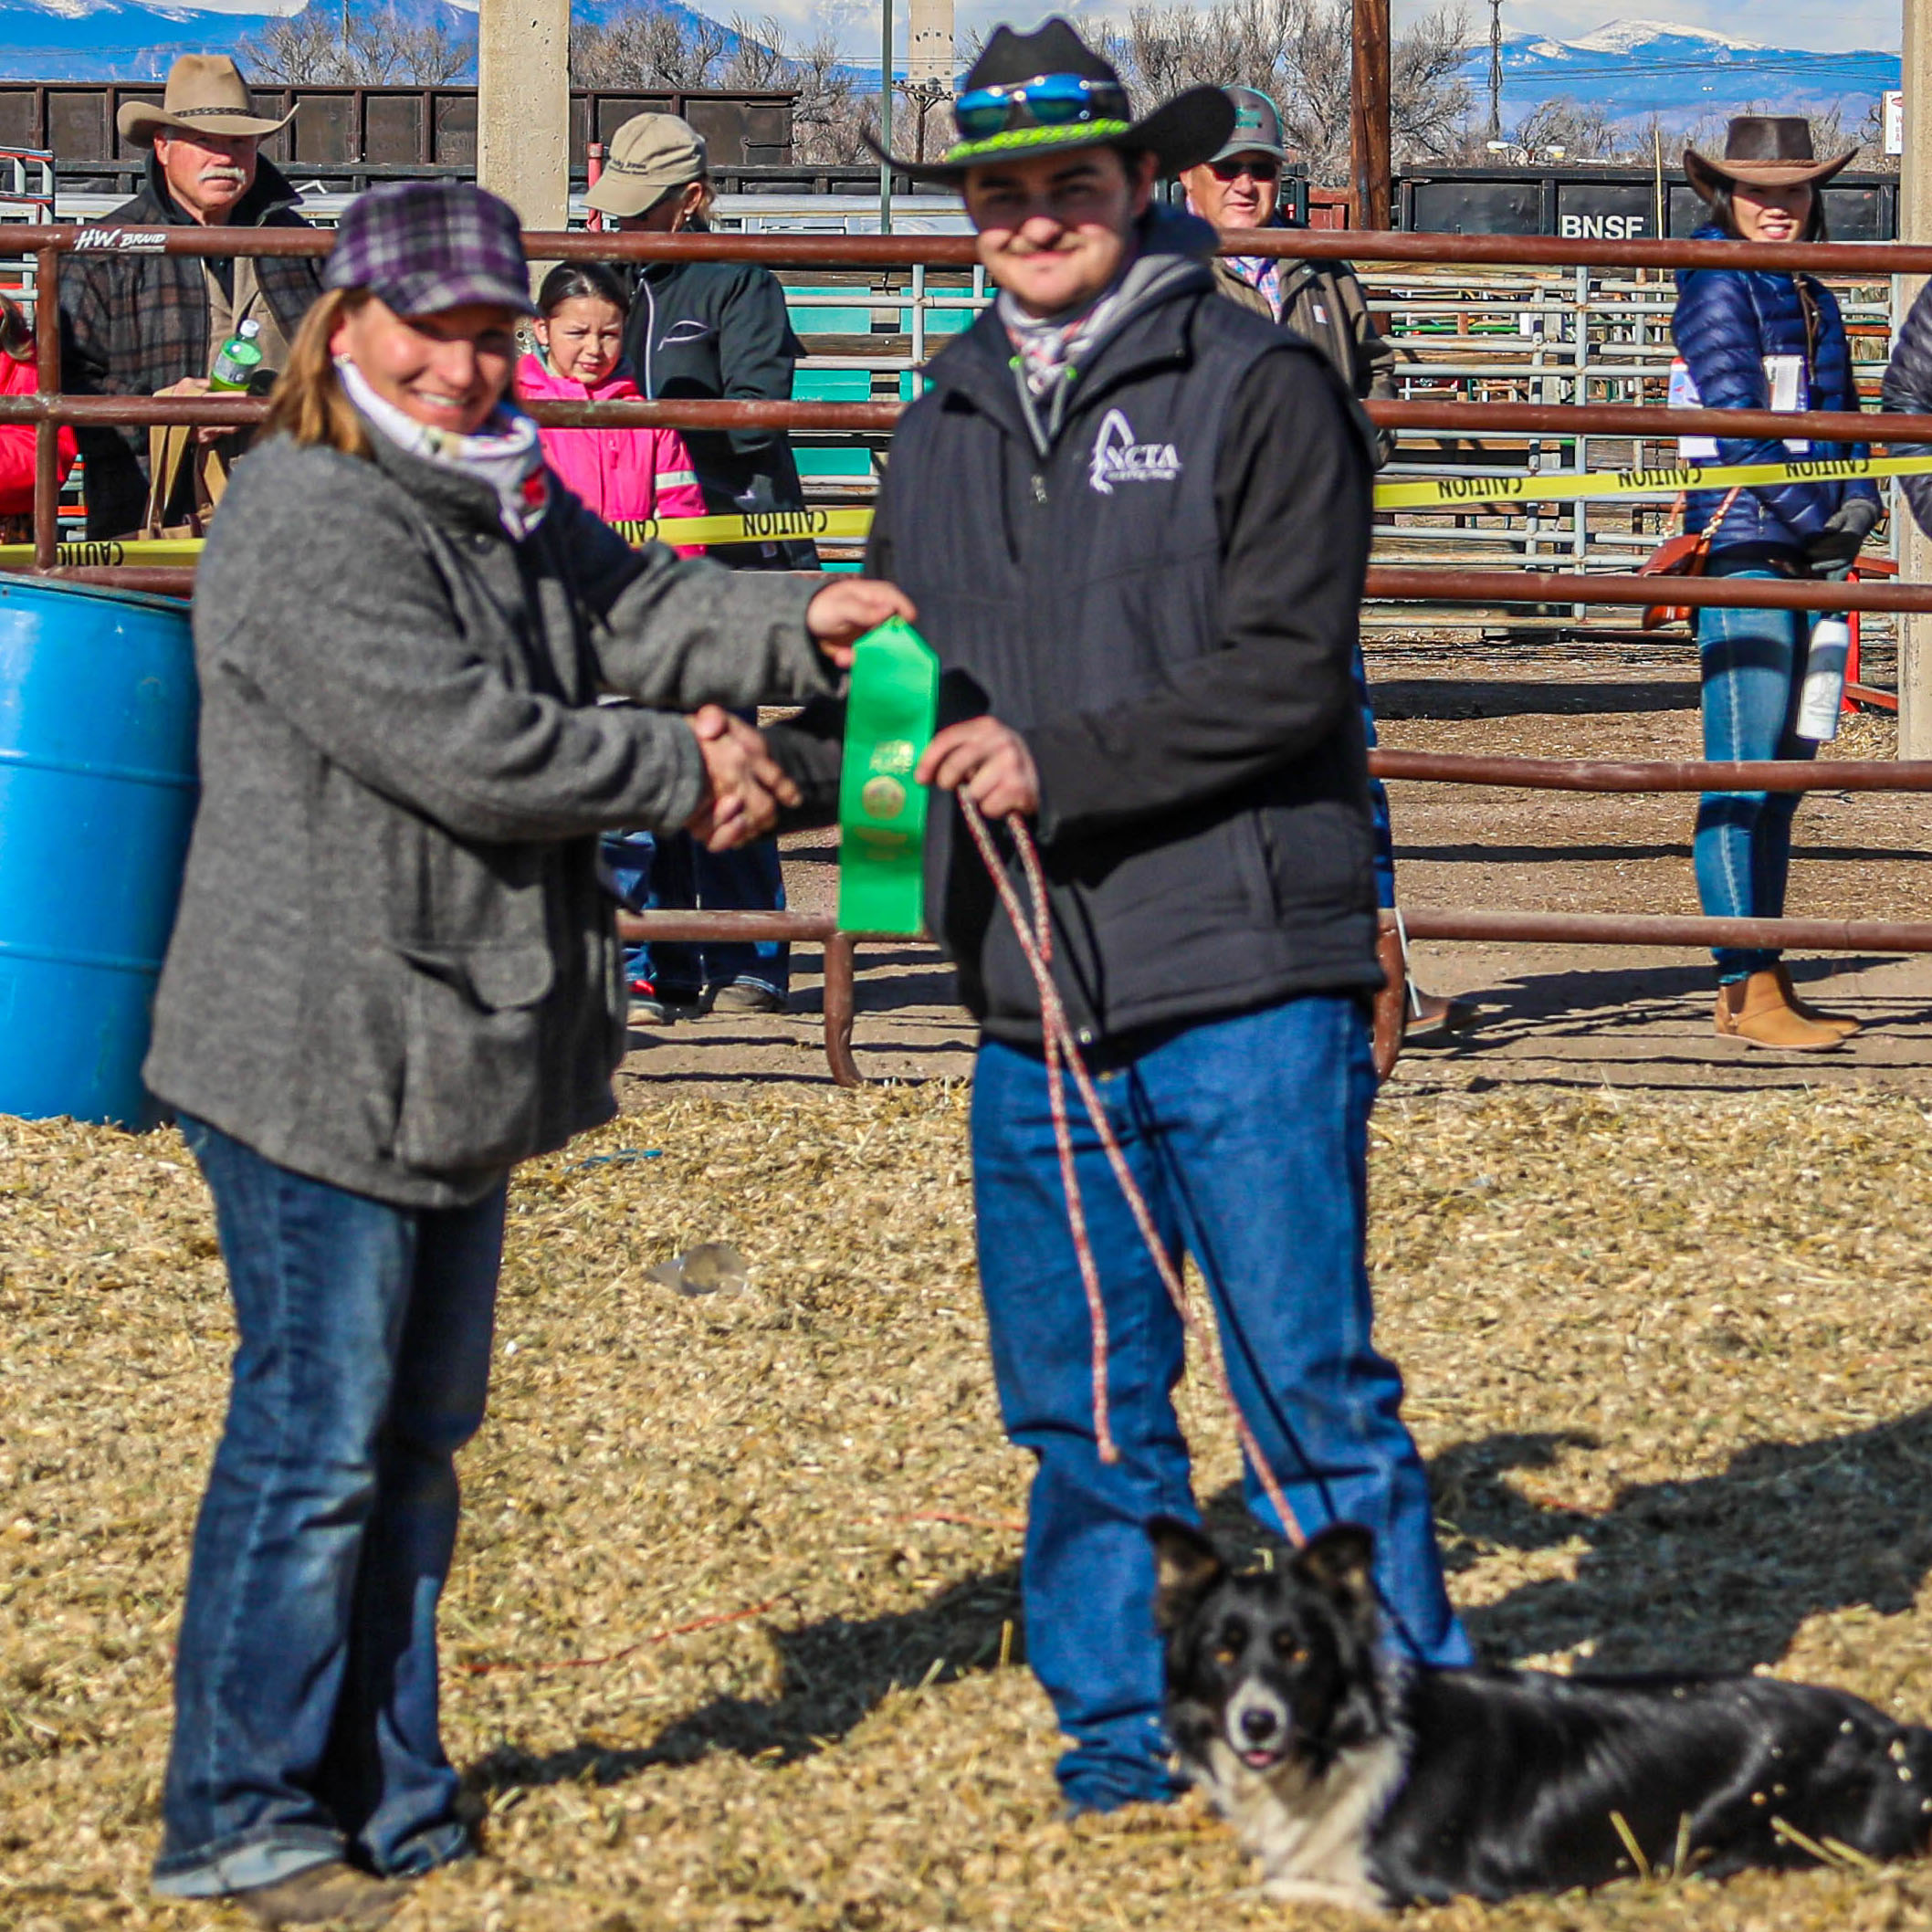 NCTA “Aggie of the Year” CJ Monheiser of Hershey, Nebraska, at right, competed at the National Western Stock Dog Trials at Denver in January, with his dog, Addie. (NCTA / XP Ranch Photography)